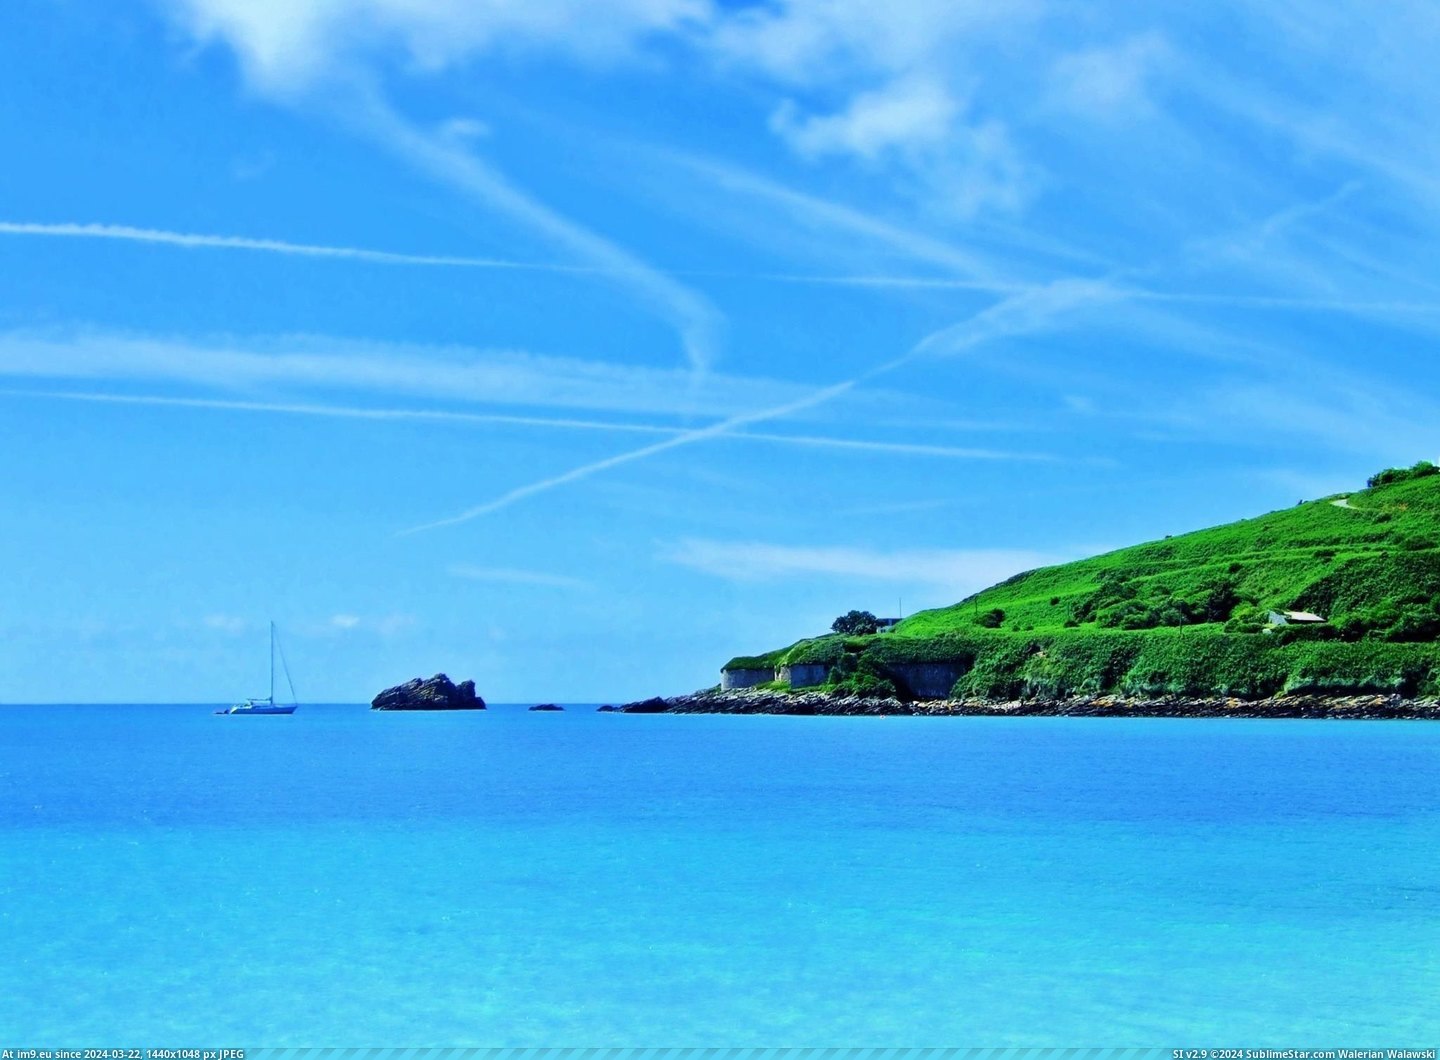 #Small #Not #Island #Channel #Alderney #Called #Islands #Mile [Pics] I am from a small Island called Alderney in the Channel Islands. It is not very well known because it is so small (3 mile Pic. (Image of album My r/PICS favs))